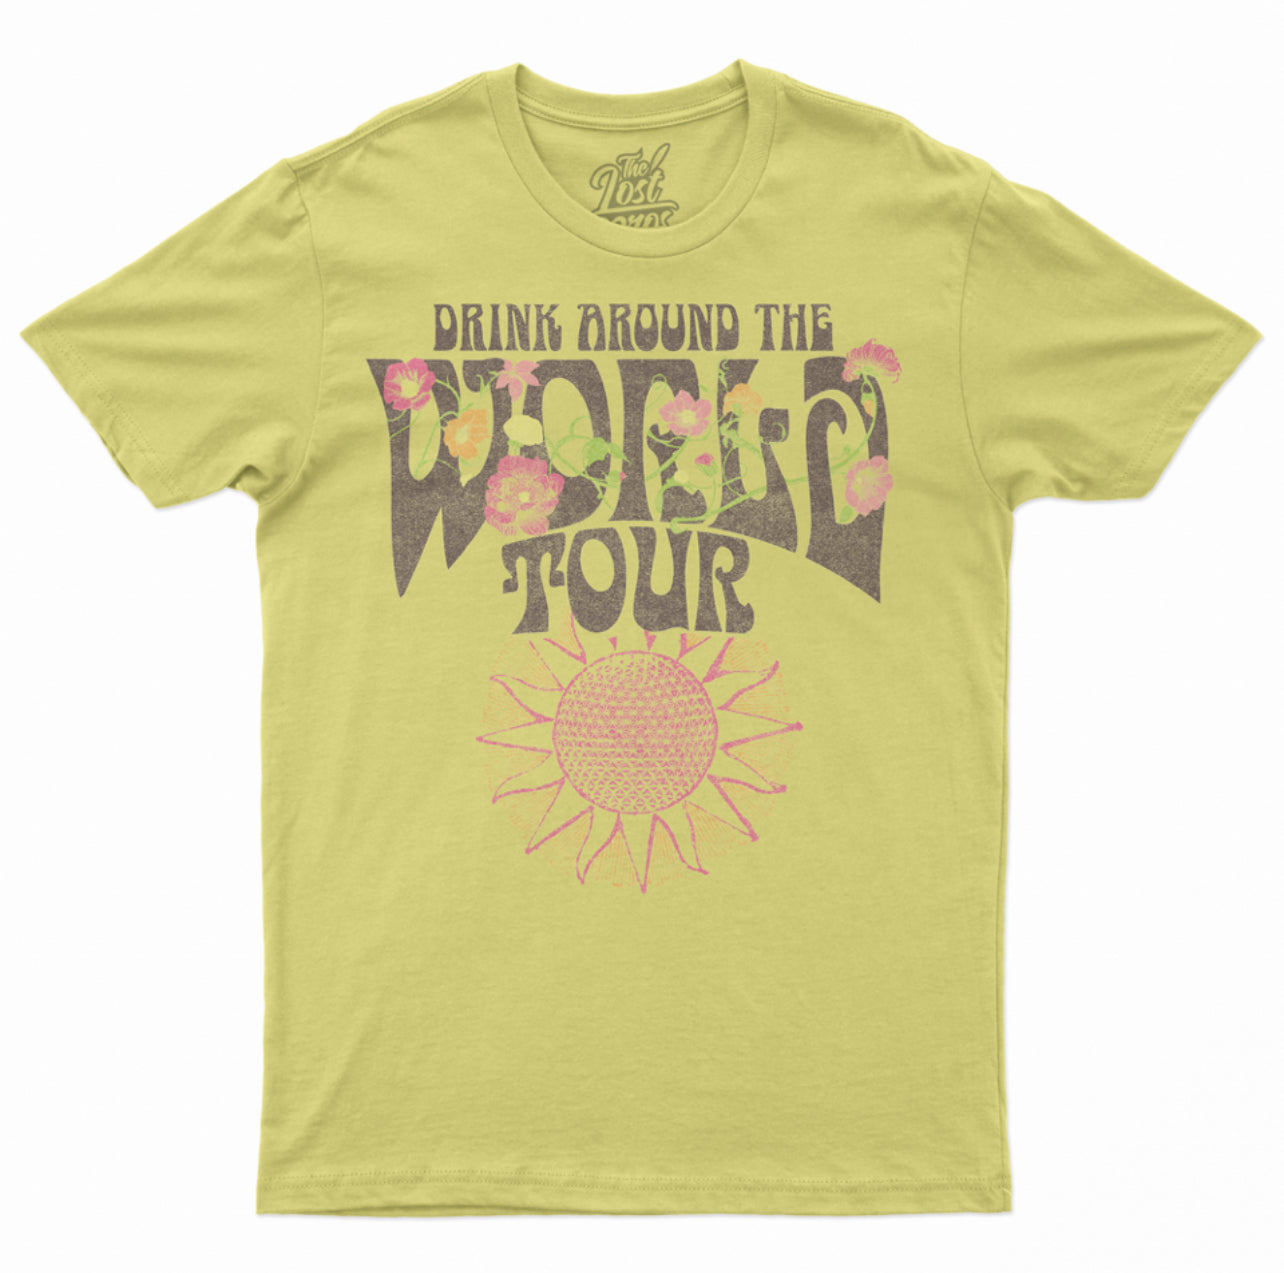 the lost bros Drink Around the World Tour - Flower Fest - Yellow